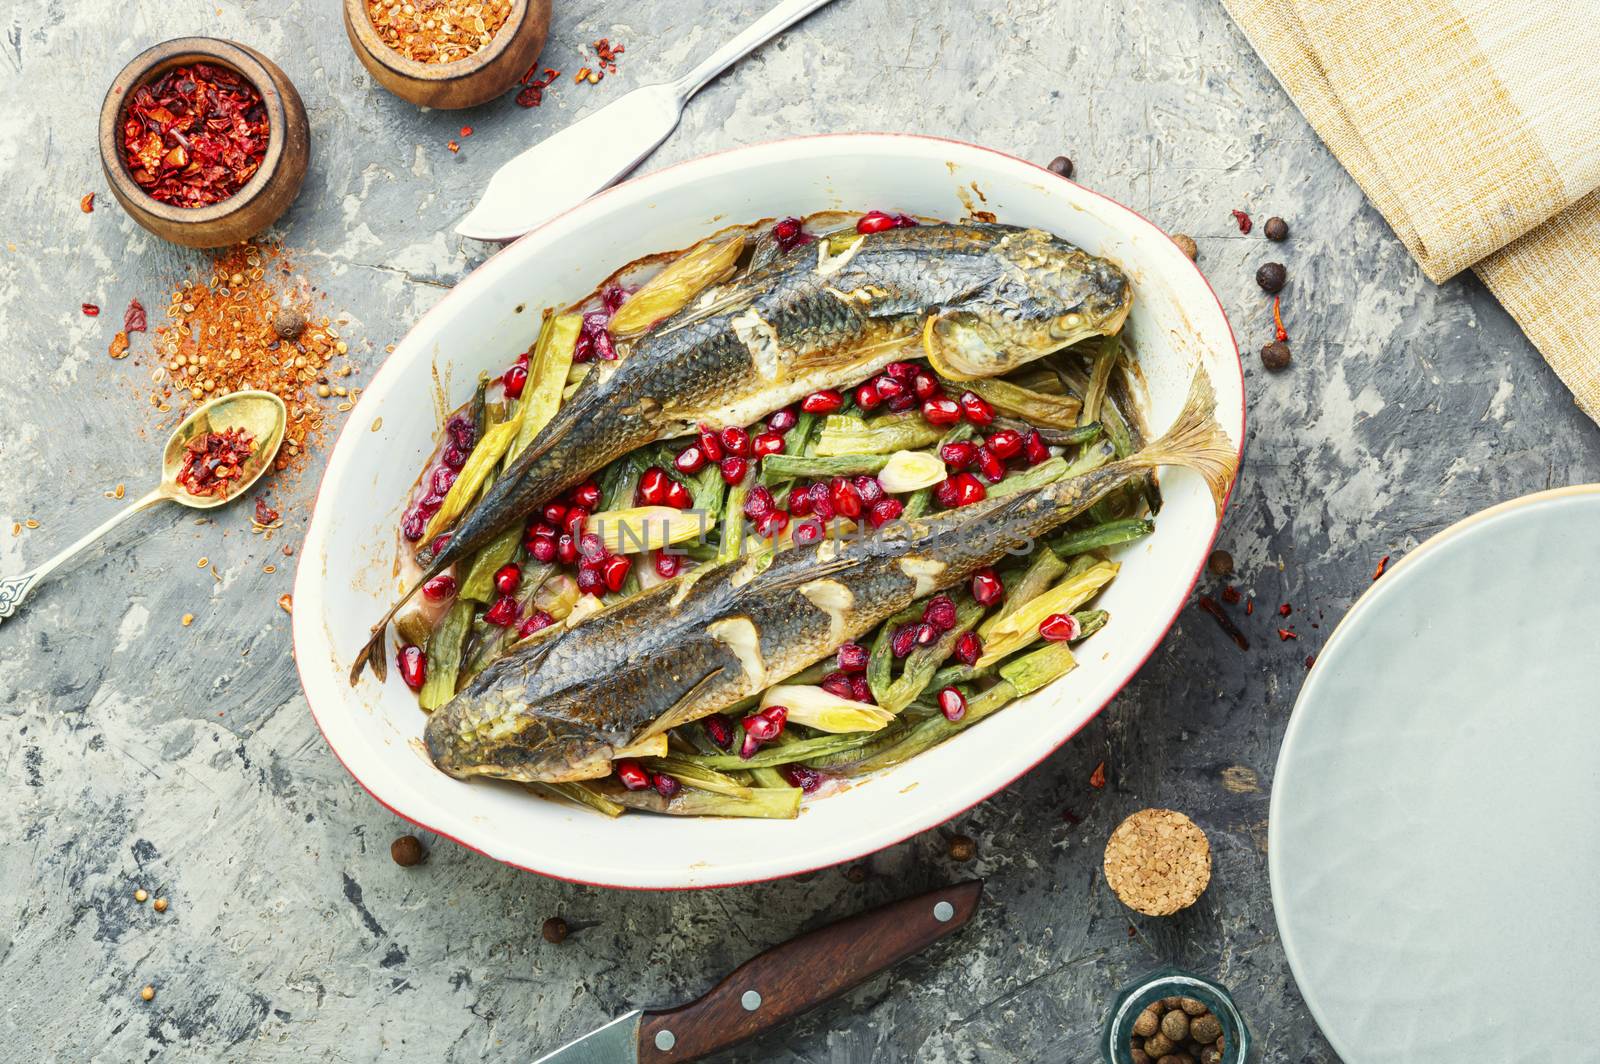 Pelengas baked with vegetables and pomegranate.Cooked roasted fish in baking dish.